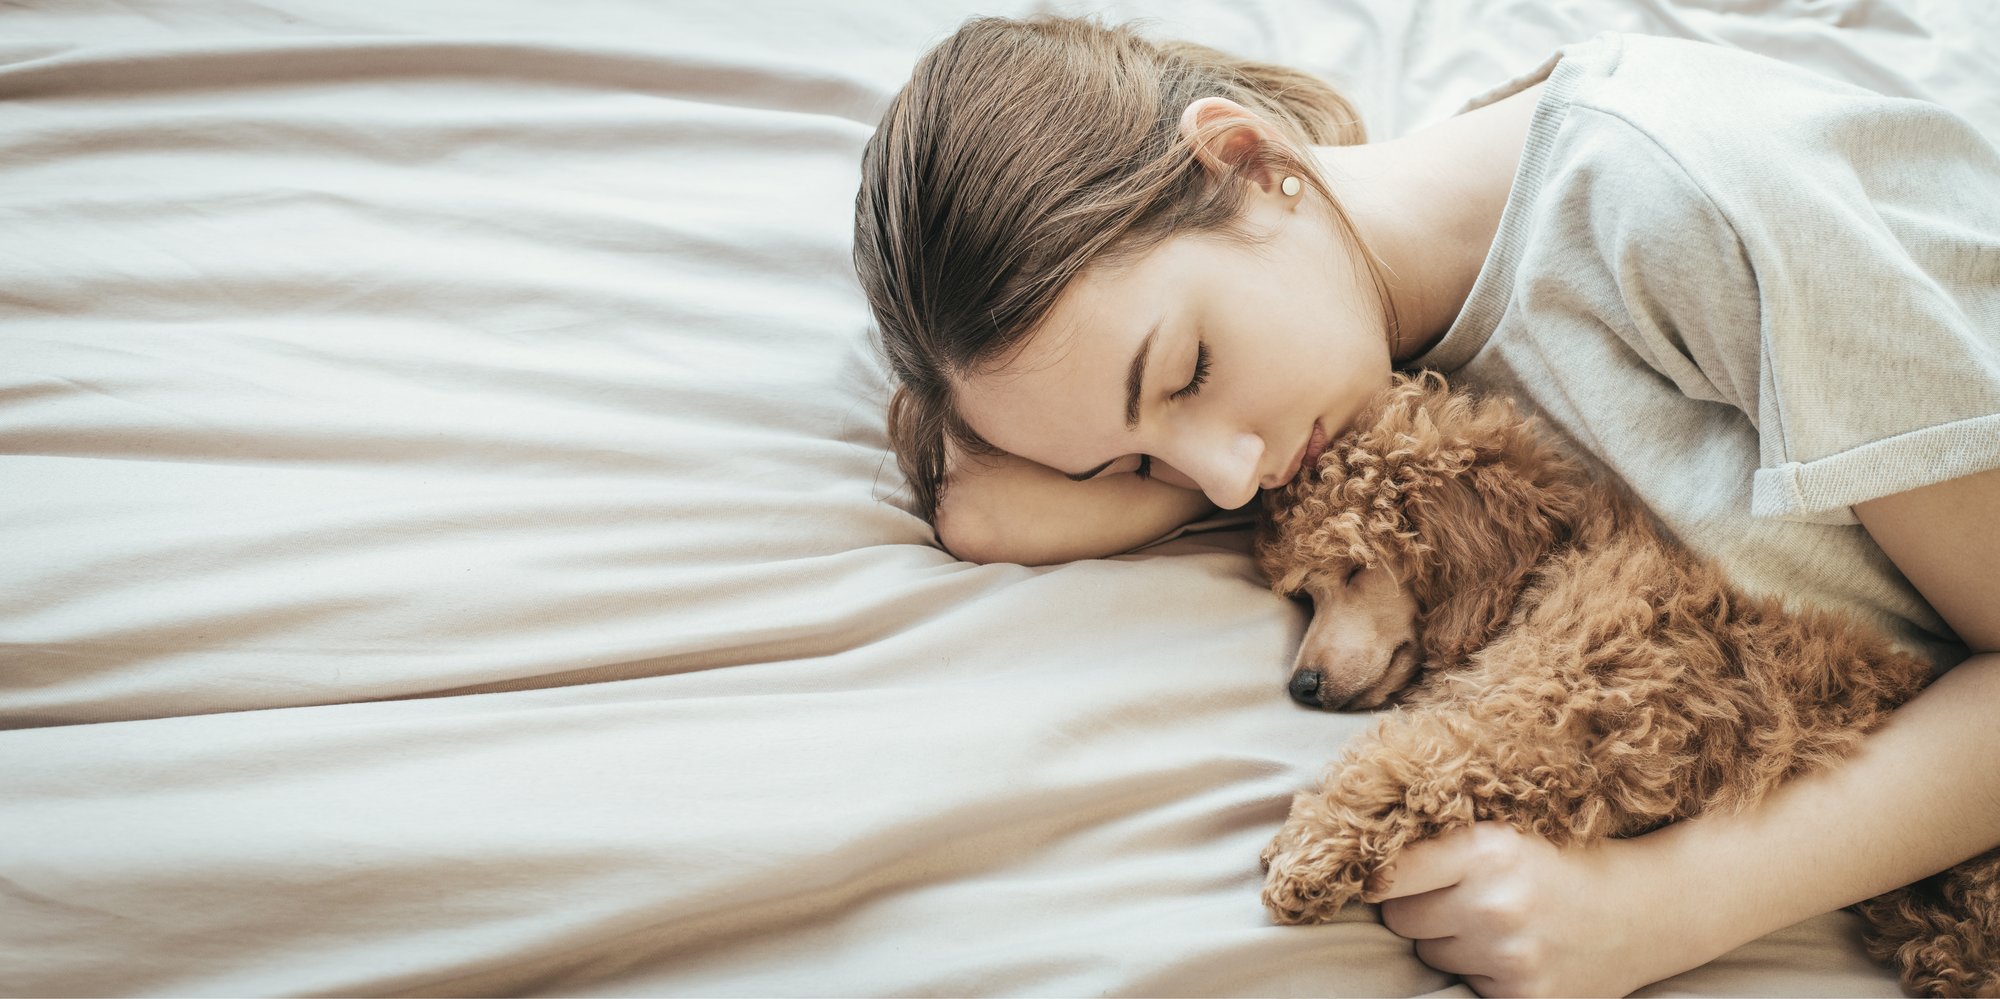 Woman sleeping in bed with a small golden poodle sleeping next to her